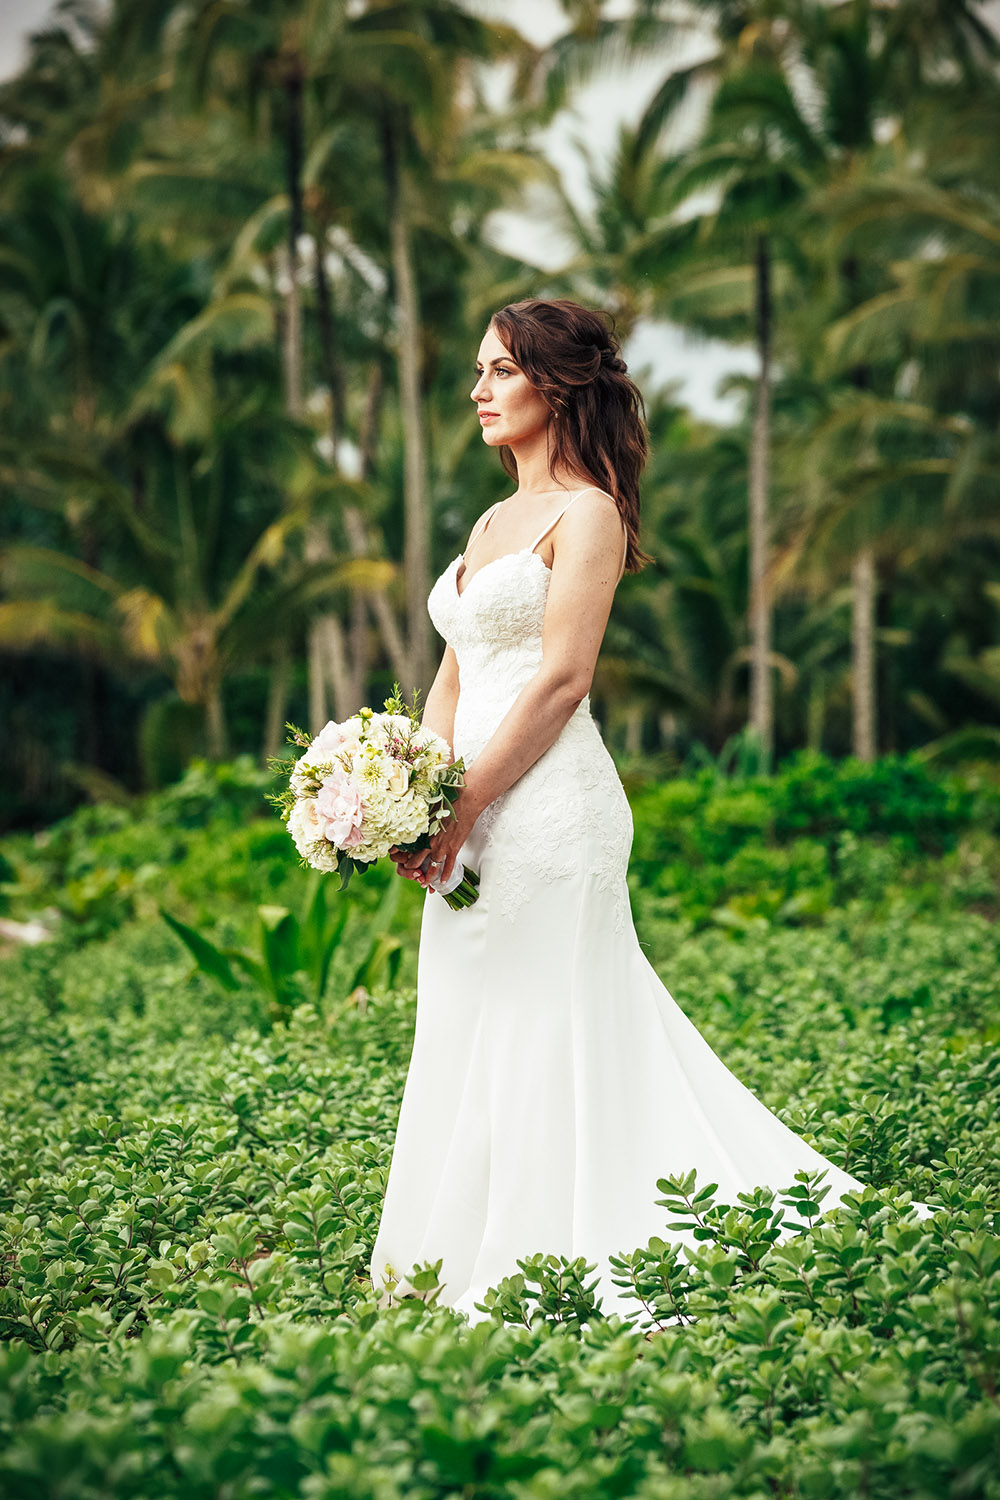 Ceremony Packages — Weddings Kauai - Planning | Packages | Consulting